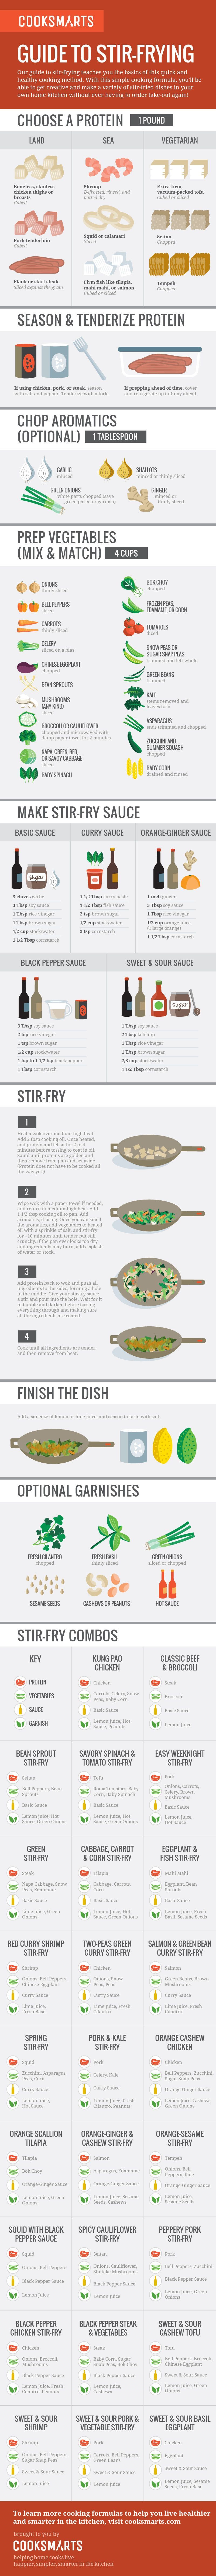 Learn how to stir-fry at home to create easy, healthy meals! via @Sandra Cook